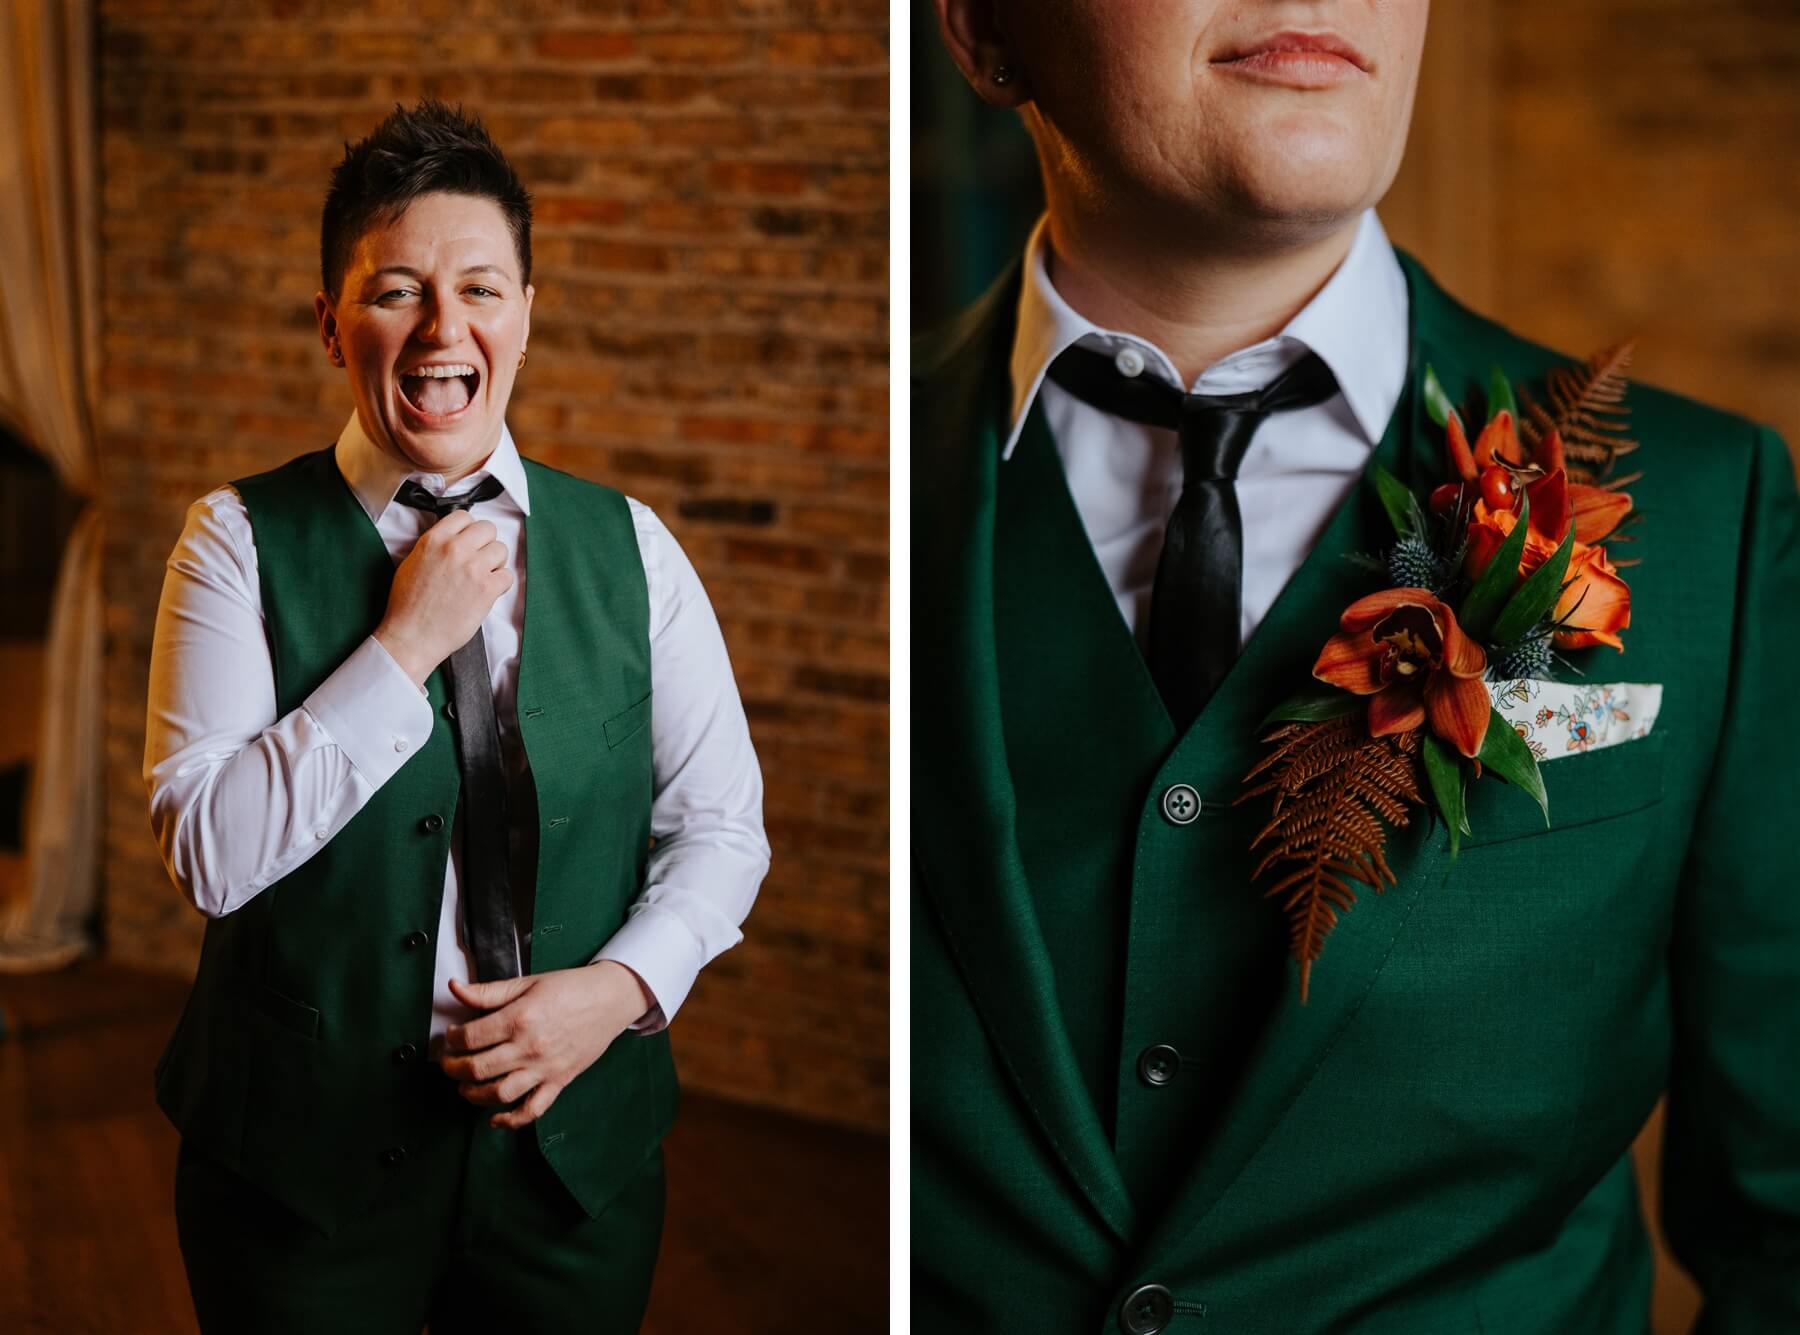 Woman wearing green suit with burnt orange boutonniere